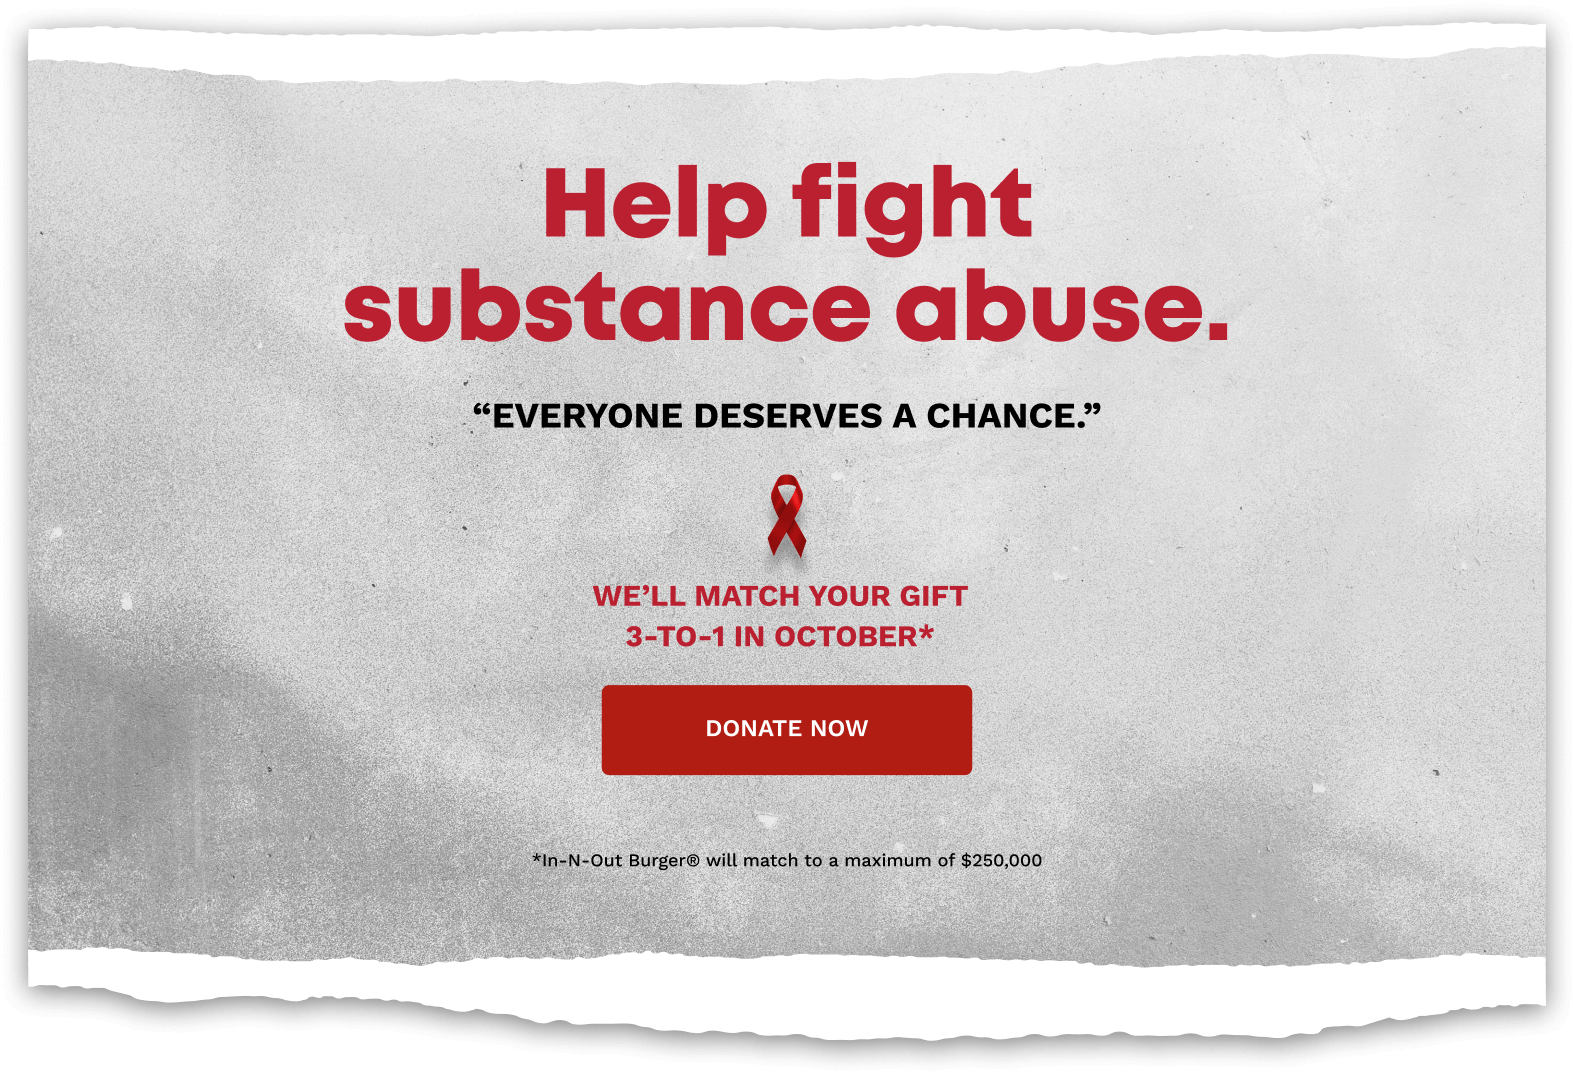 Help Fight substance abuse